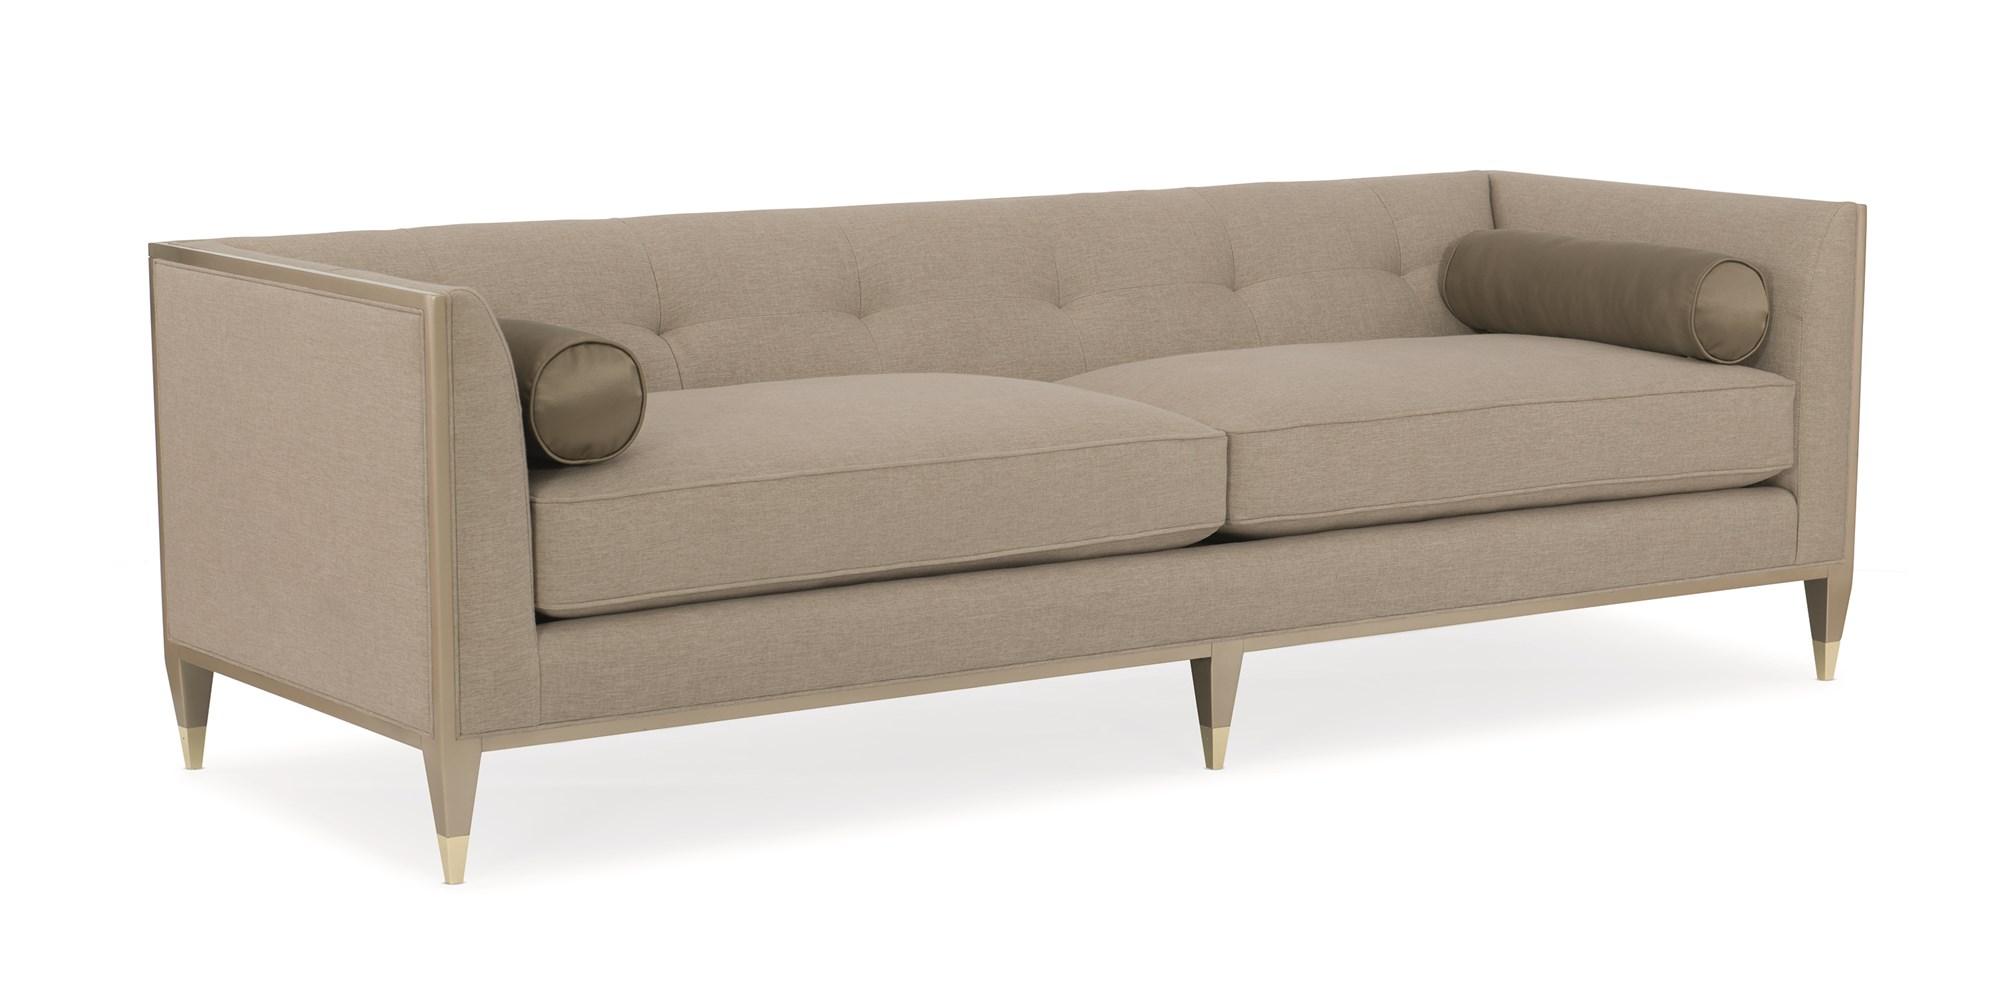 Contemporary Sofa SOFT LANDING UPH-016-014-A in Taupe Fabric